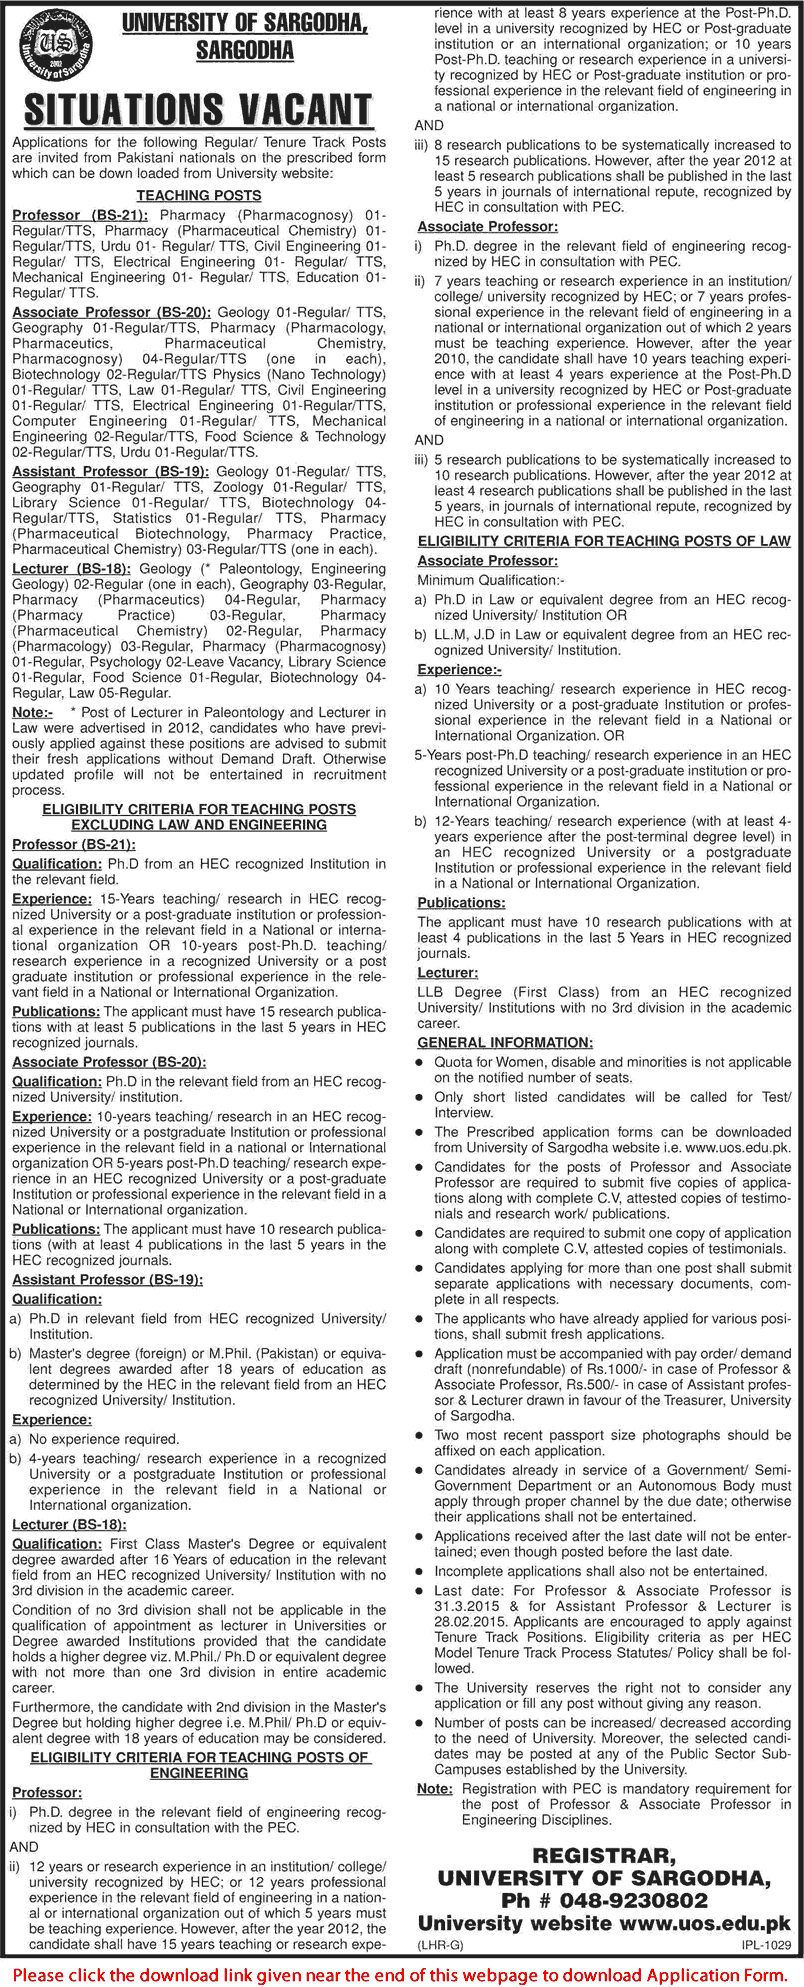 University of Sargodha Jobs 2015 Teaching Faculty Application Form Download Latest